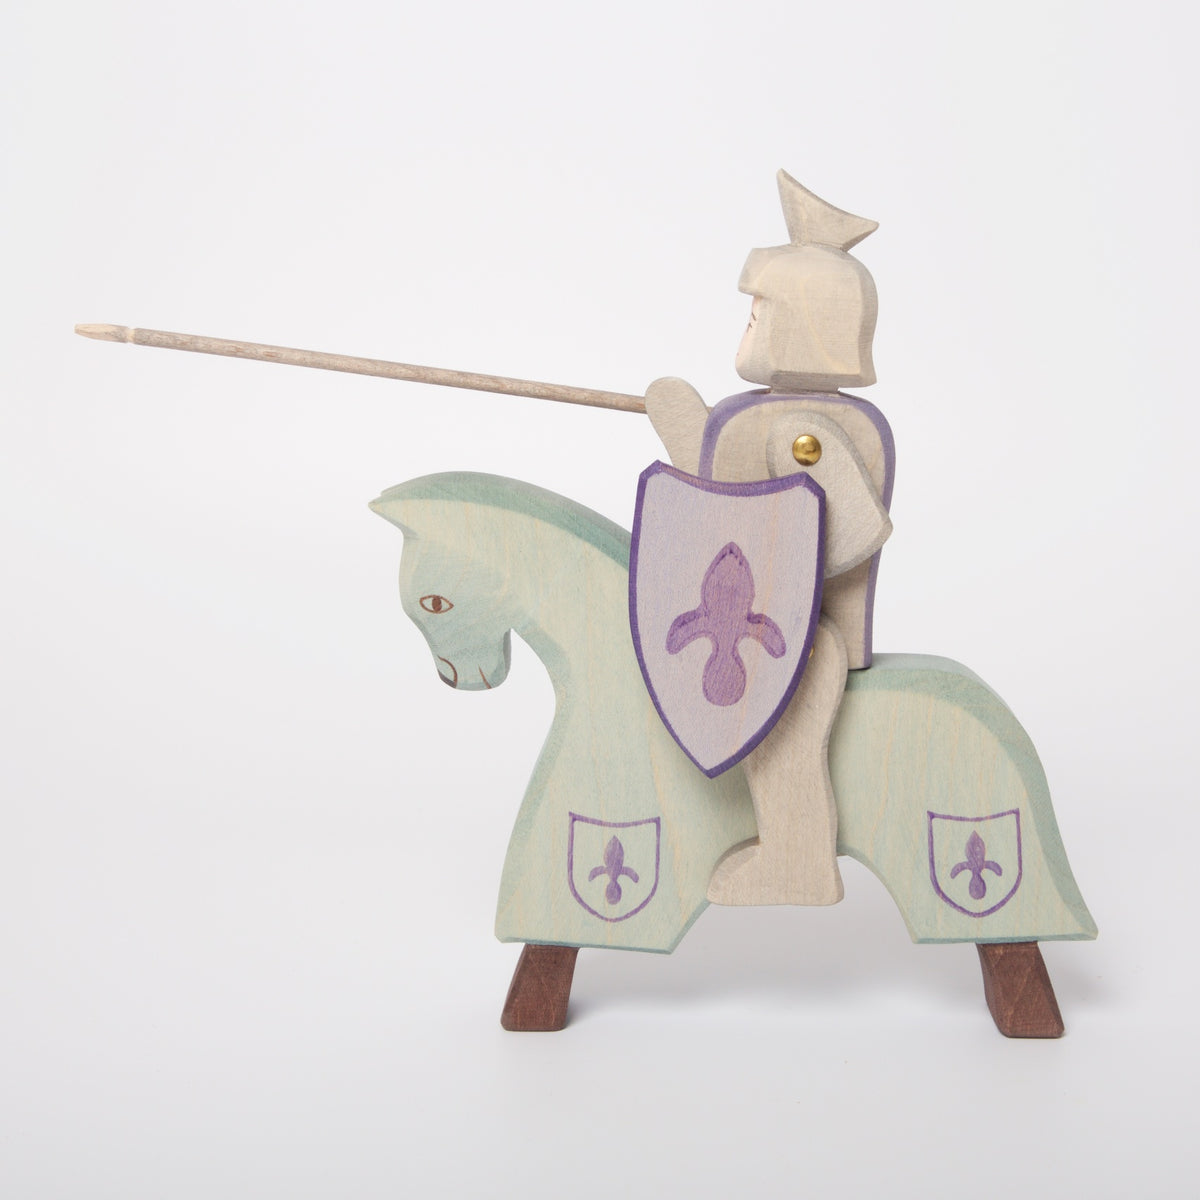 Waldorf Wooden Toys Wood Blocks, Wooden Horse Knight Figures